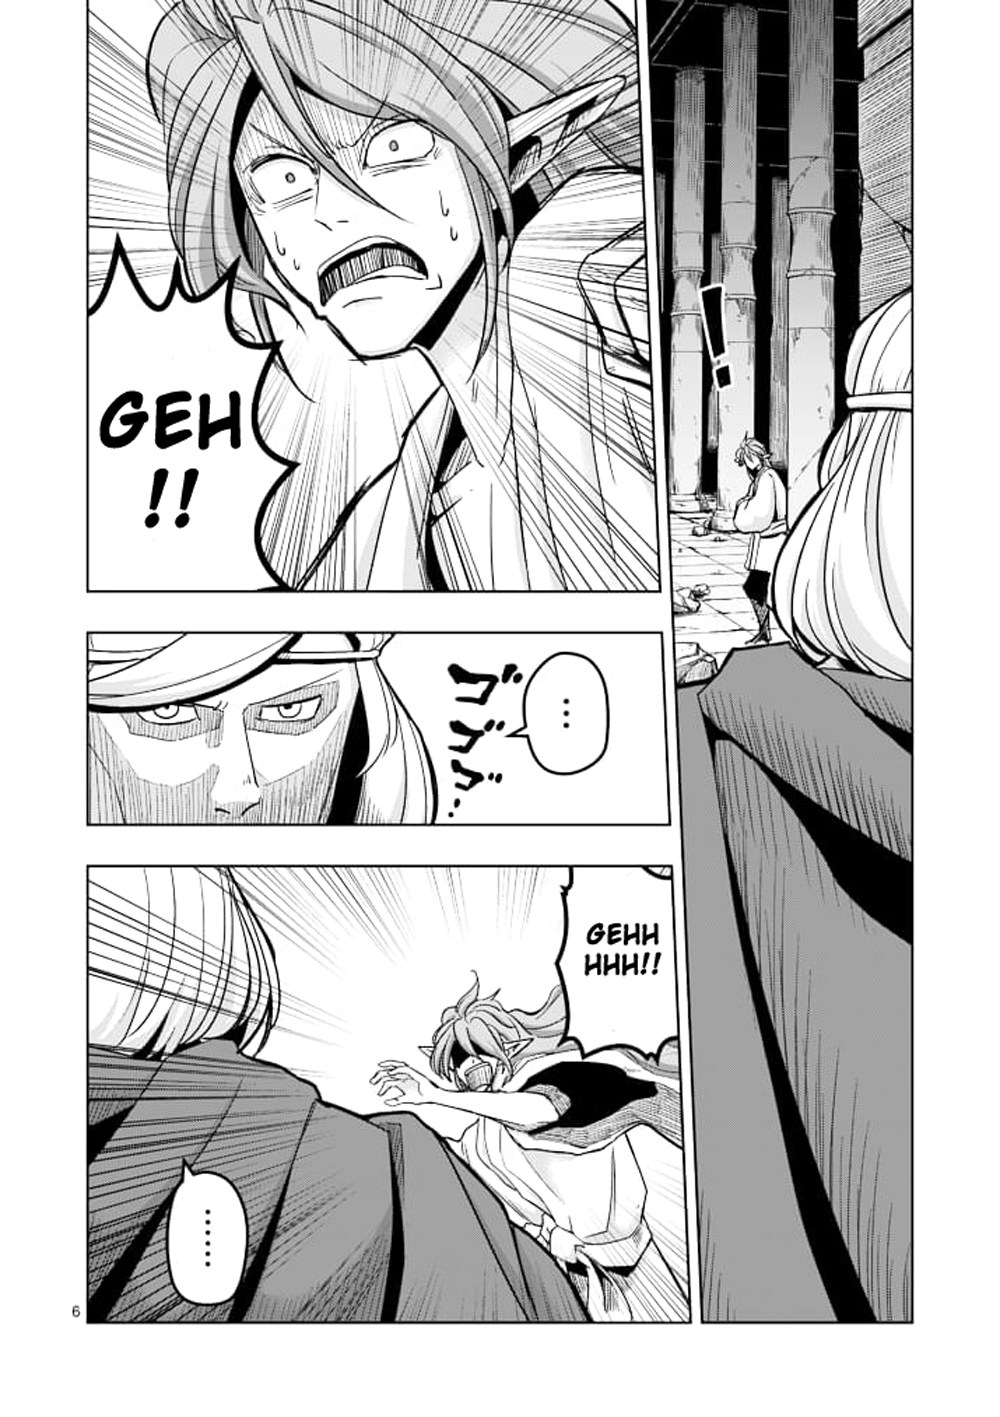 Helck Chapter 42